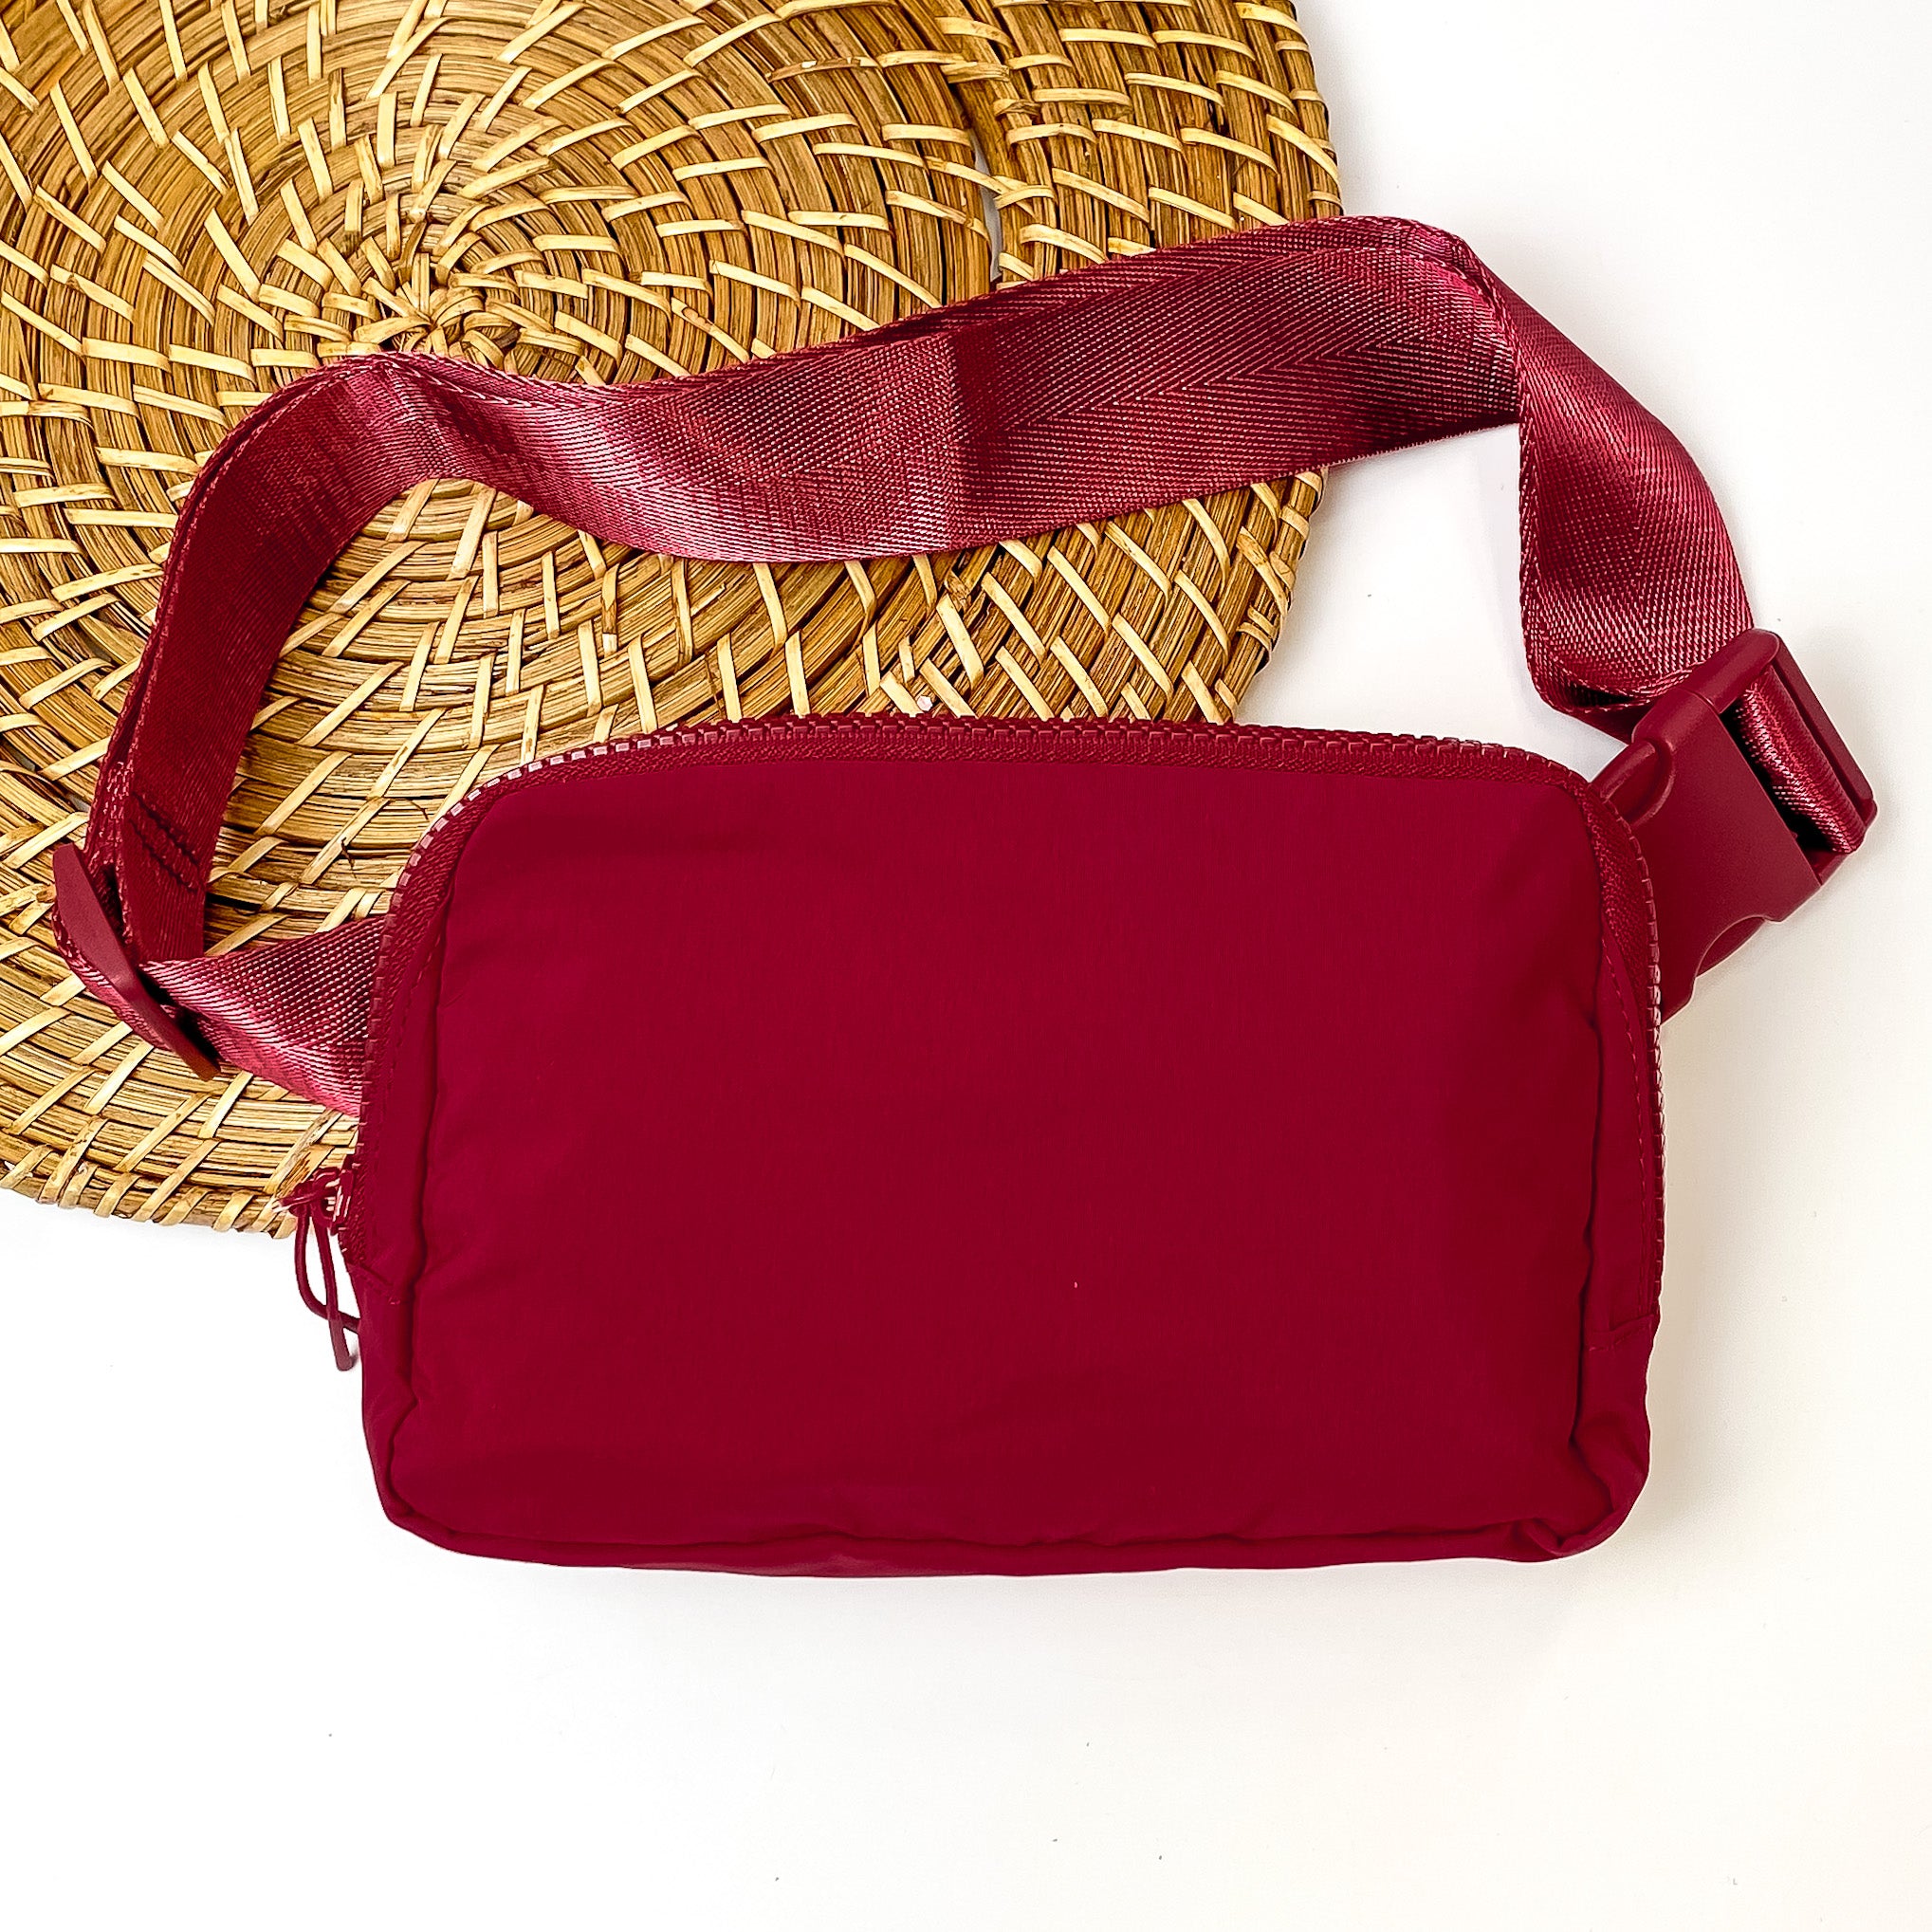 Pictured is a rectangle fanny pack with a top zipper with tassel in maroon. This bag also includes a maroon strap and maroon accents. This bag is pictured on a white and brown patterned background. 